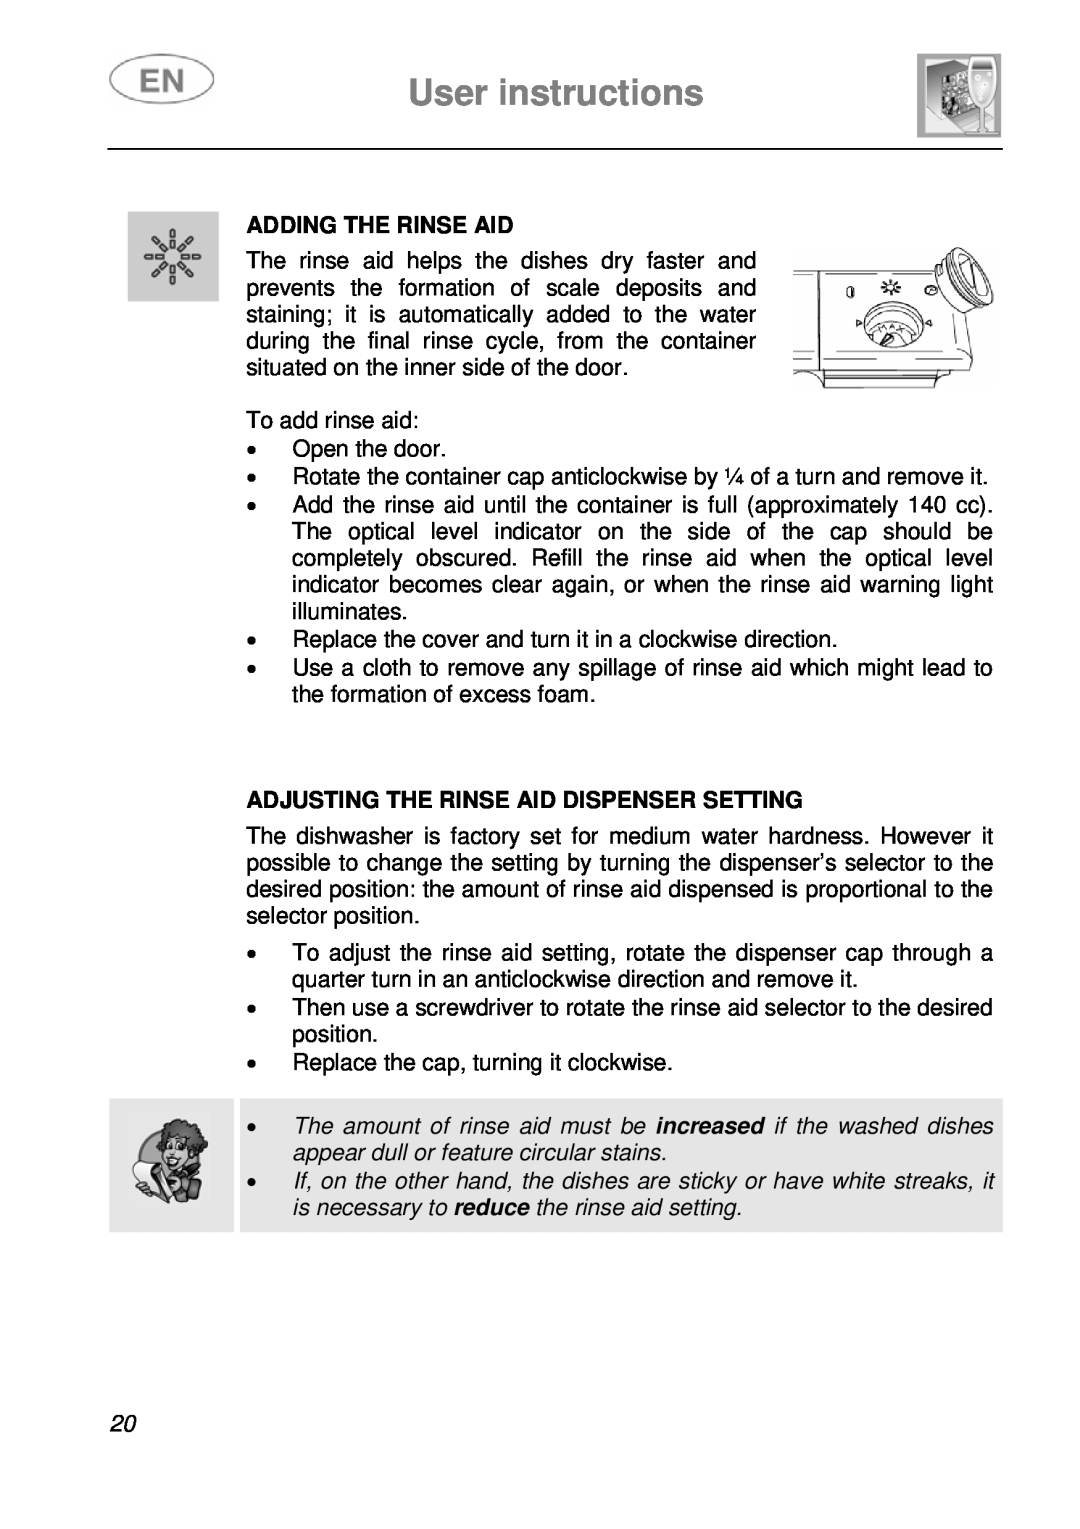 Smeg LS19-7 instruction manual User instructions, Adding The Rinse Aid, Adjusting The Rinse Aid Dispenser Setting 